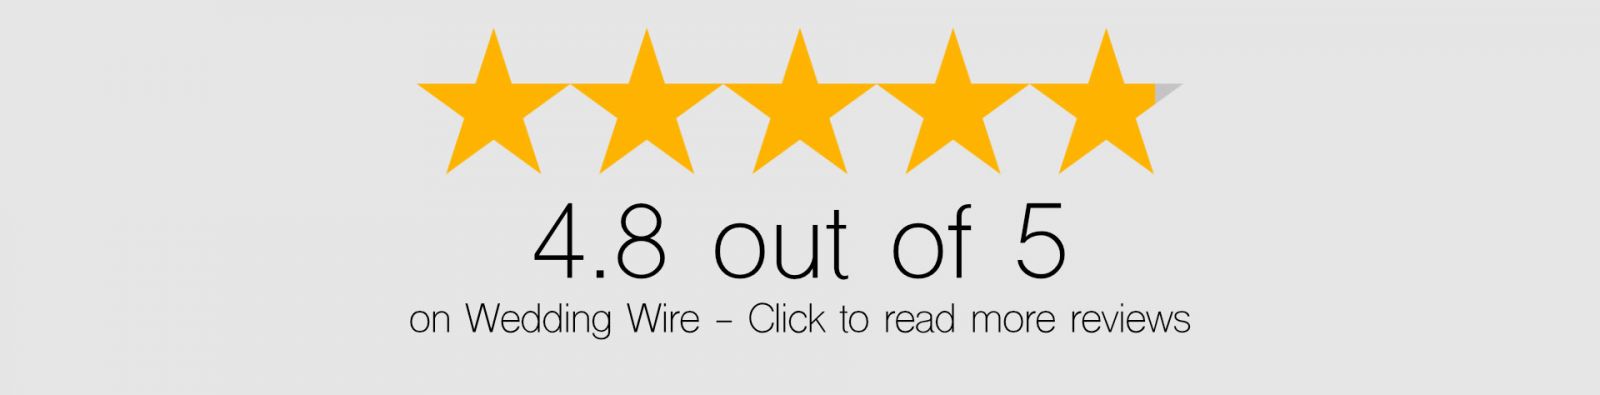 4.8 out of 5 stars on Wedding Wire